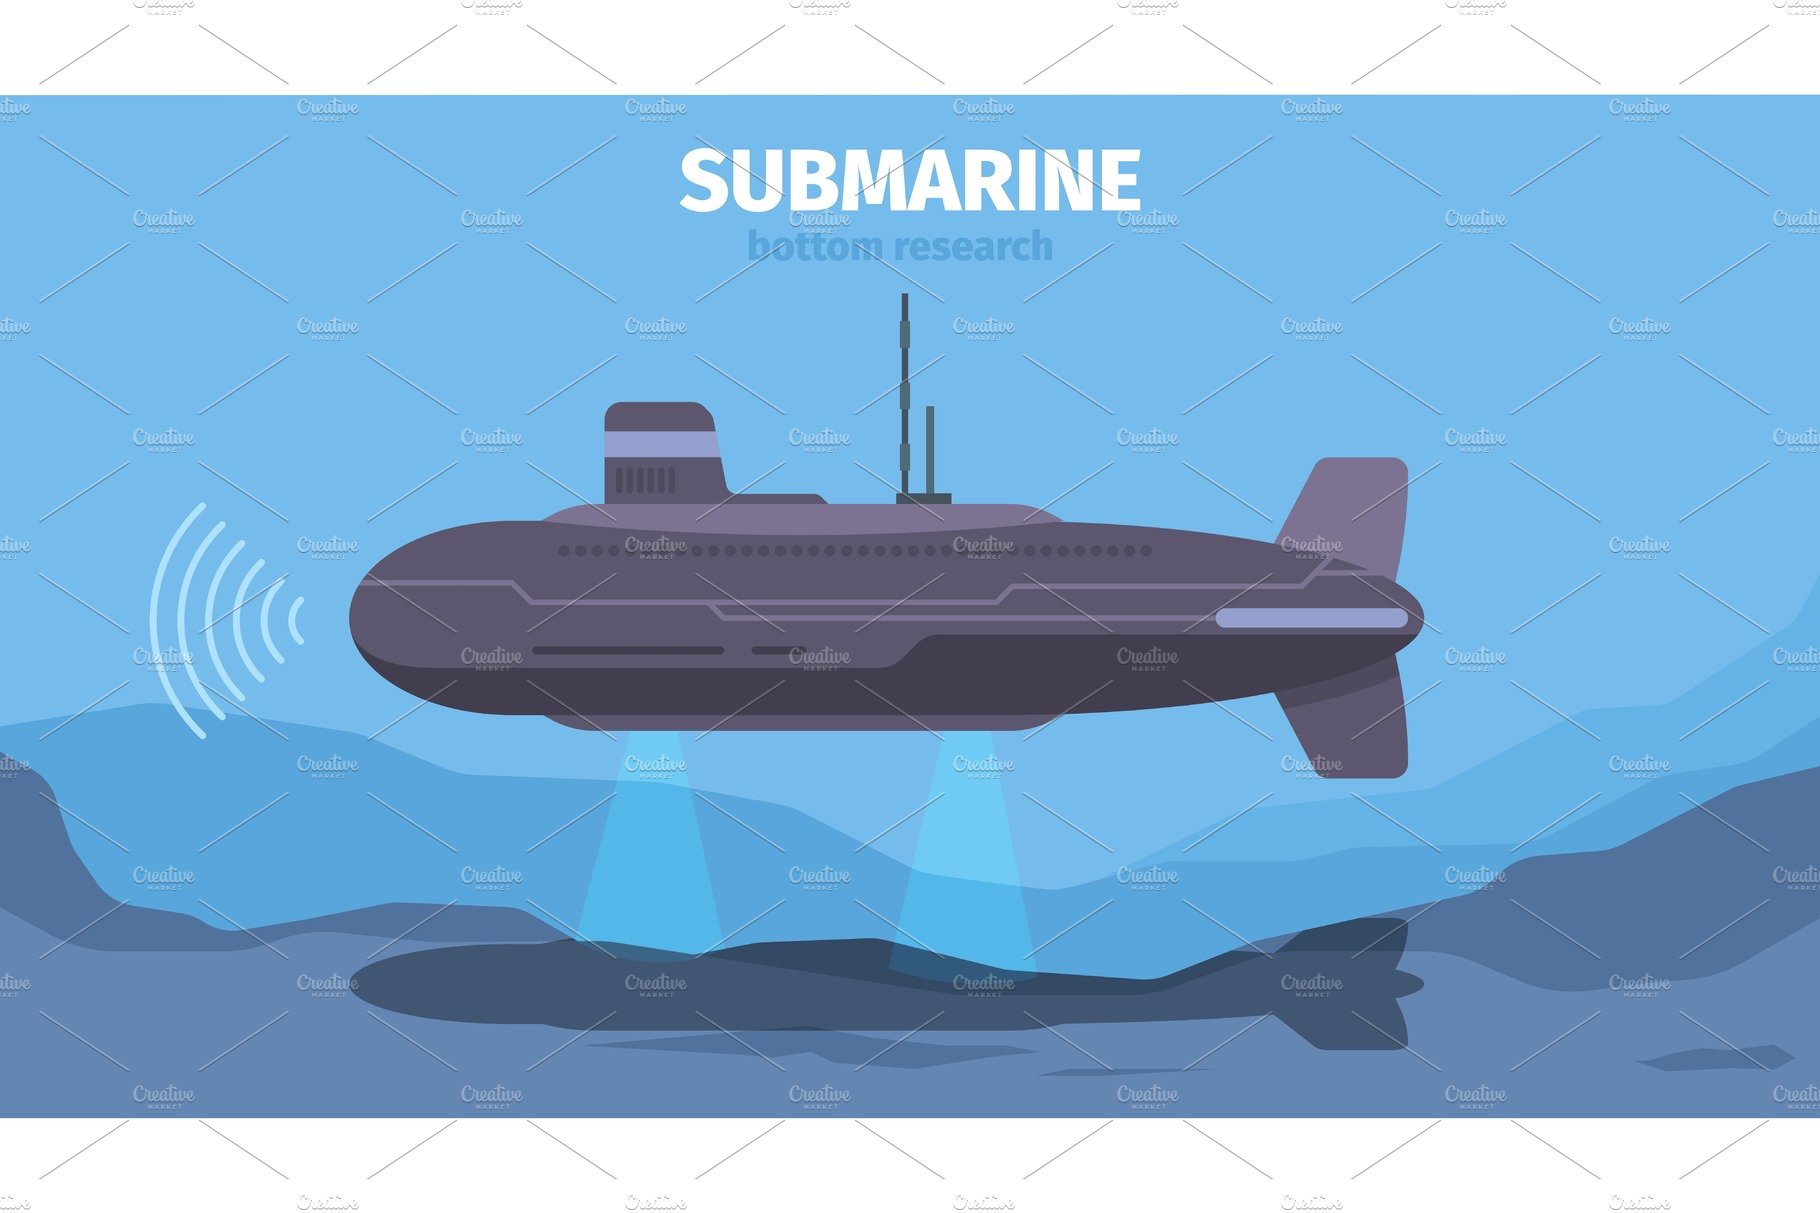 Underwater life with submarine cover image.